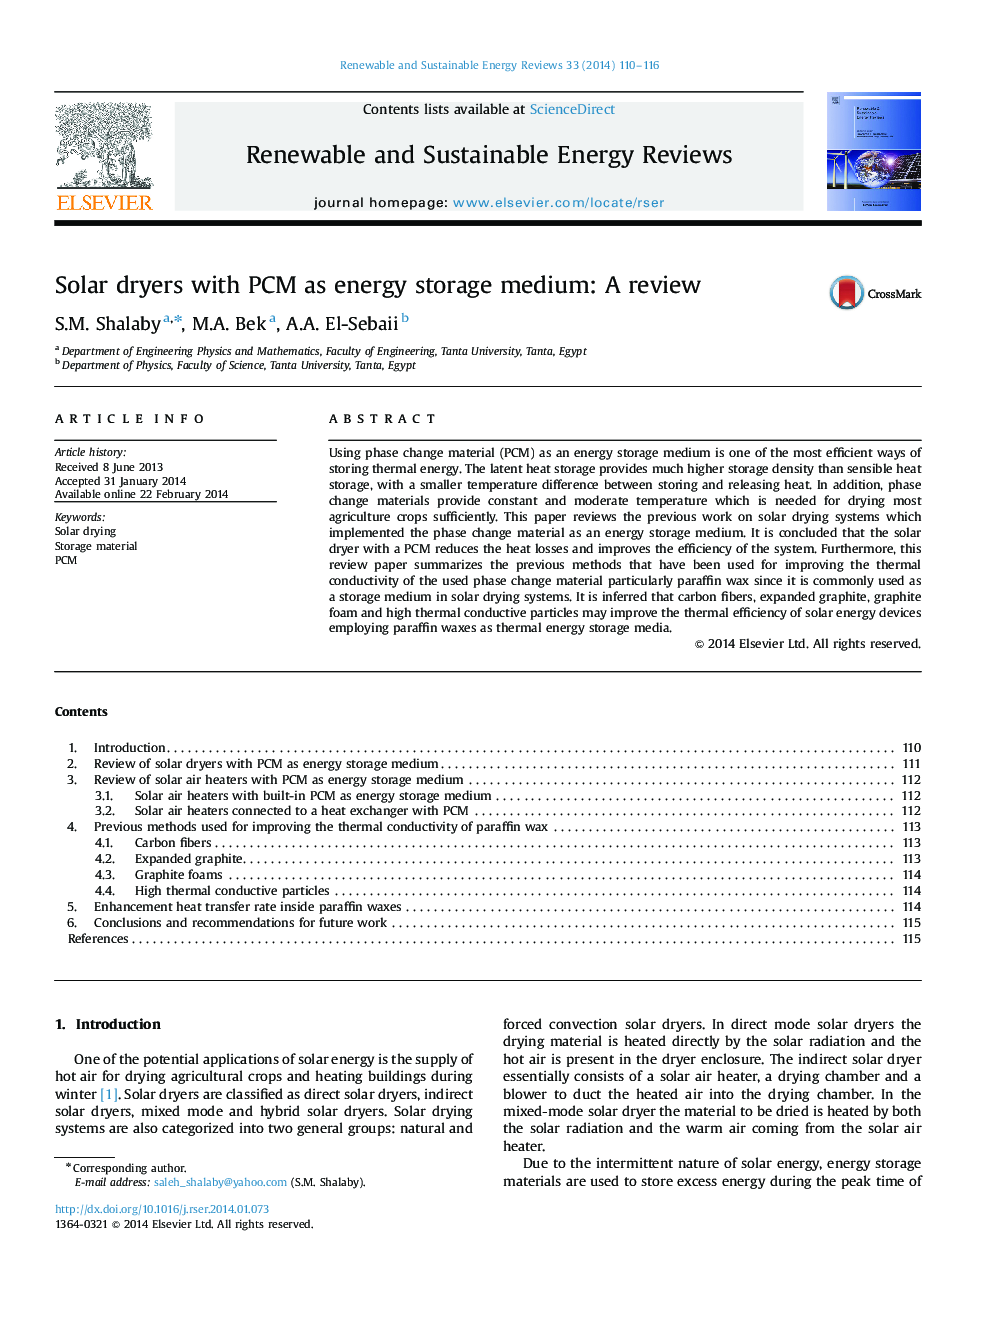 Solar dryers with PCM as energy storage medium: A review